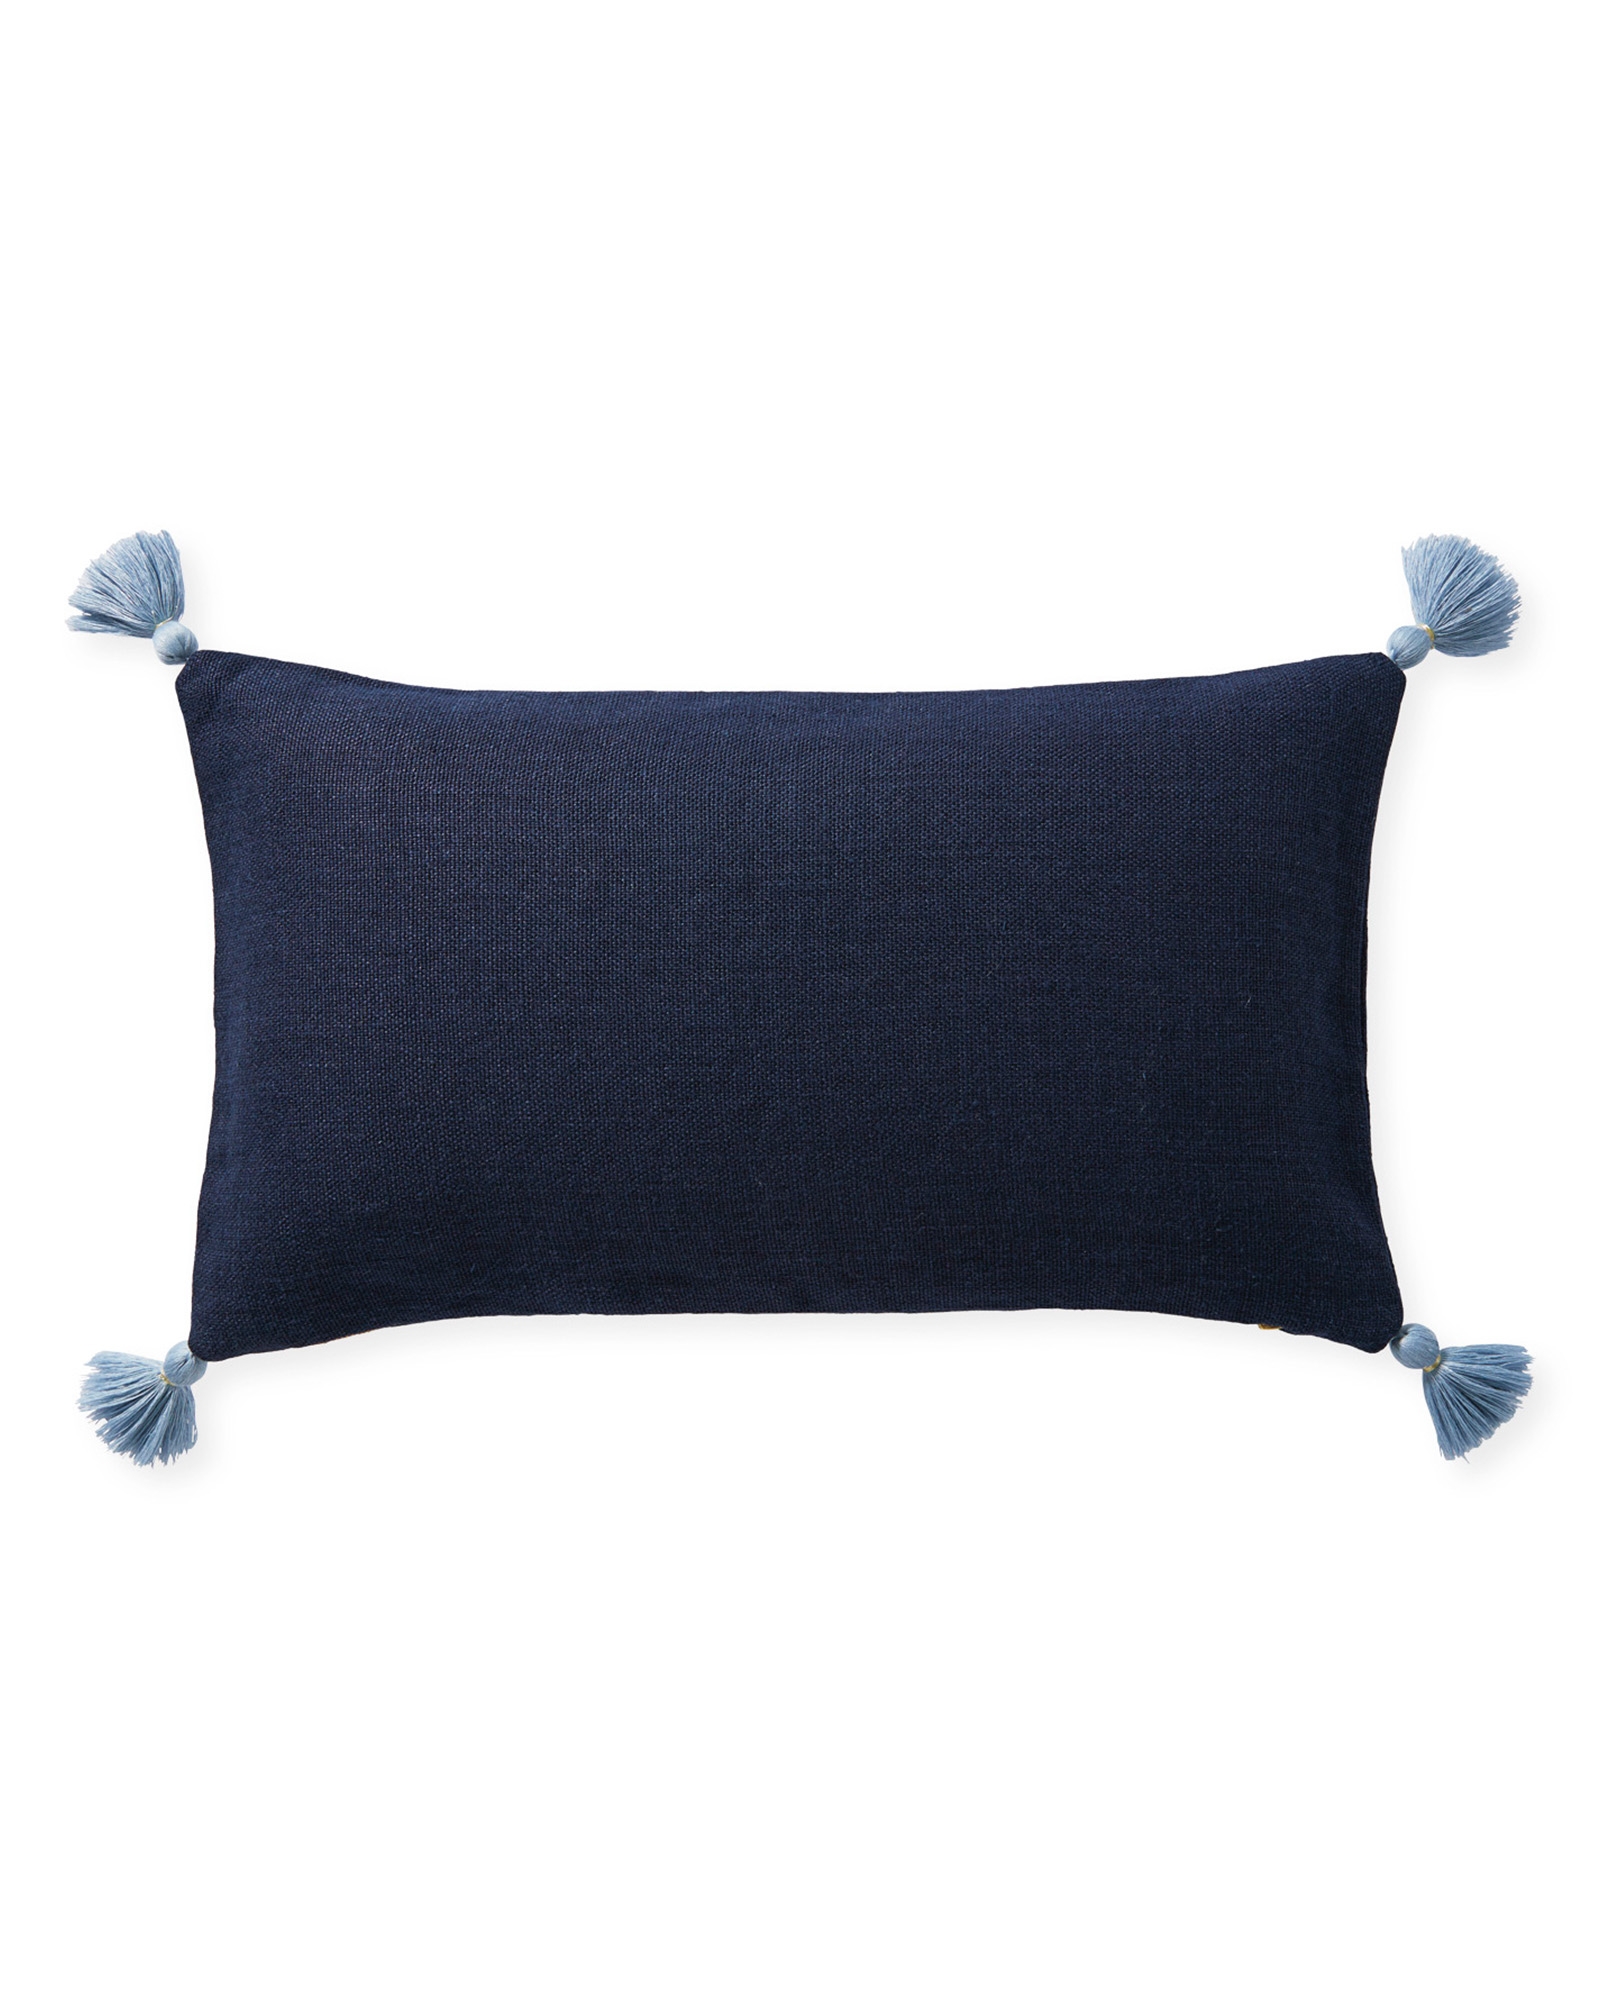 Kemp 12" x 21" Pillow Cover - Navy - Insert sold separately - Image 1